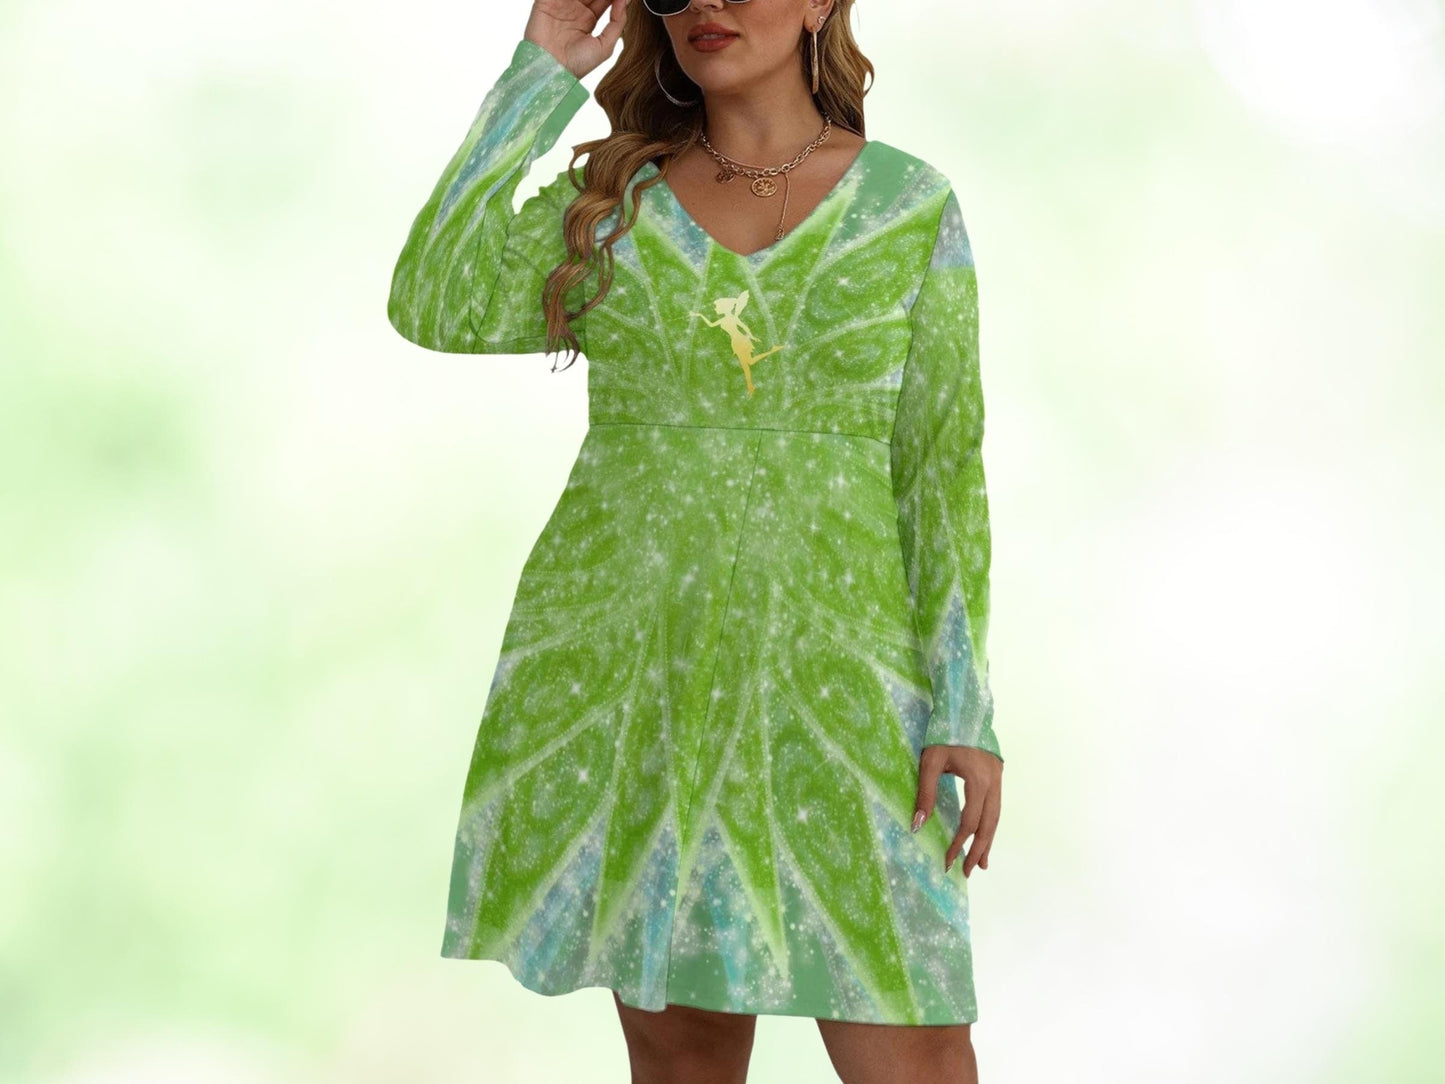 Tinkerbell Inspired Plus Size Women's V-neck Long Sleeve Dress With or Without Gold Fairy, Gift for Her, Adult Halloween Costume, Sexy BBW